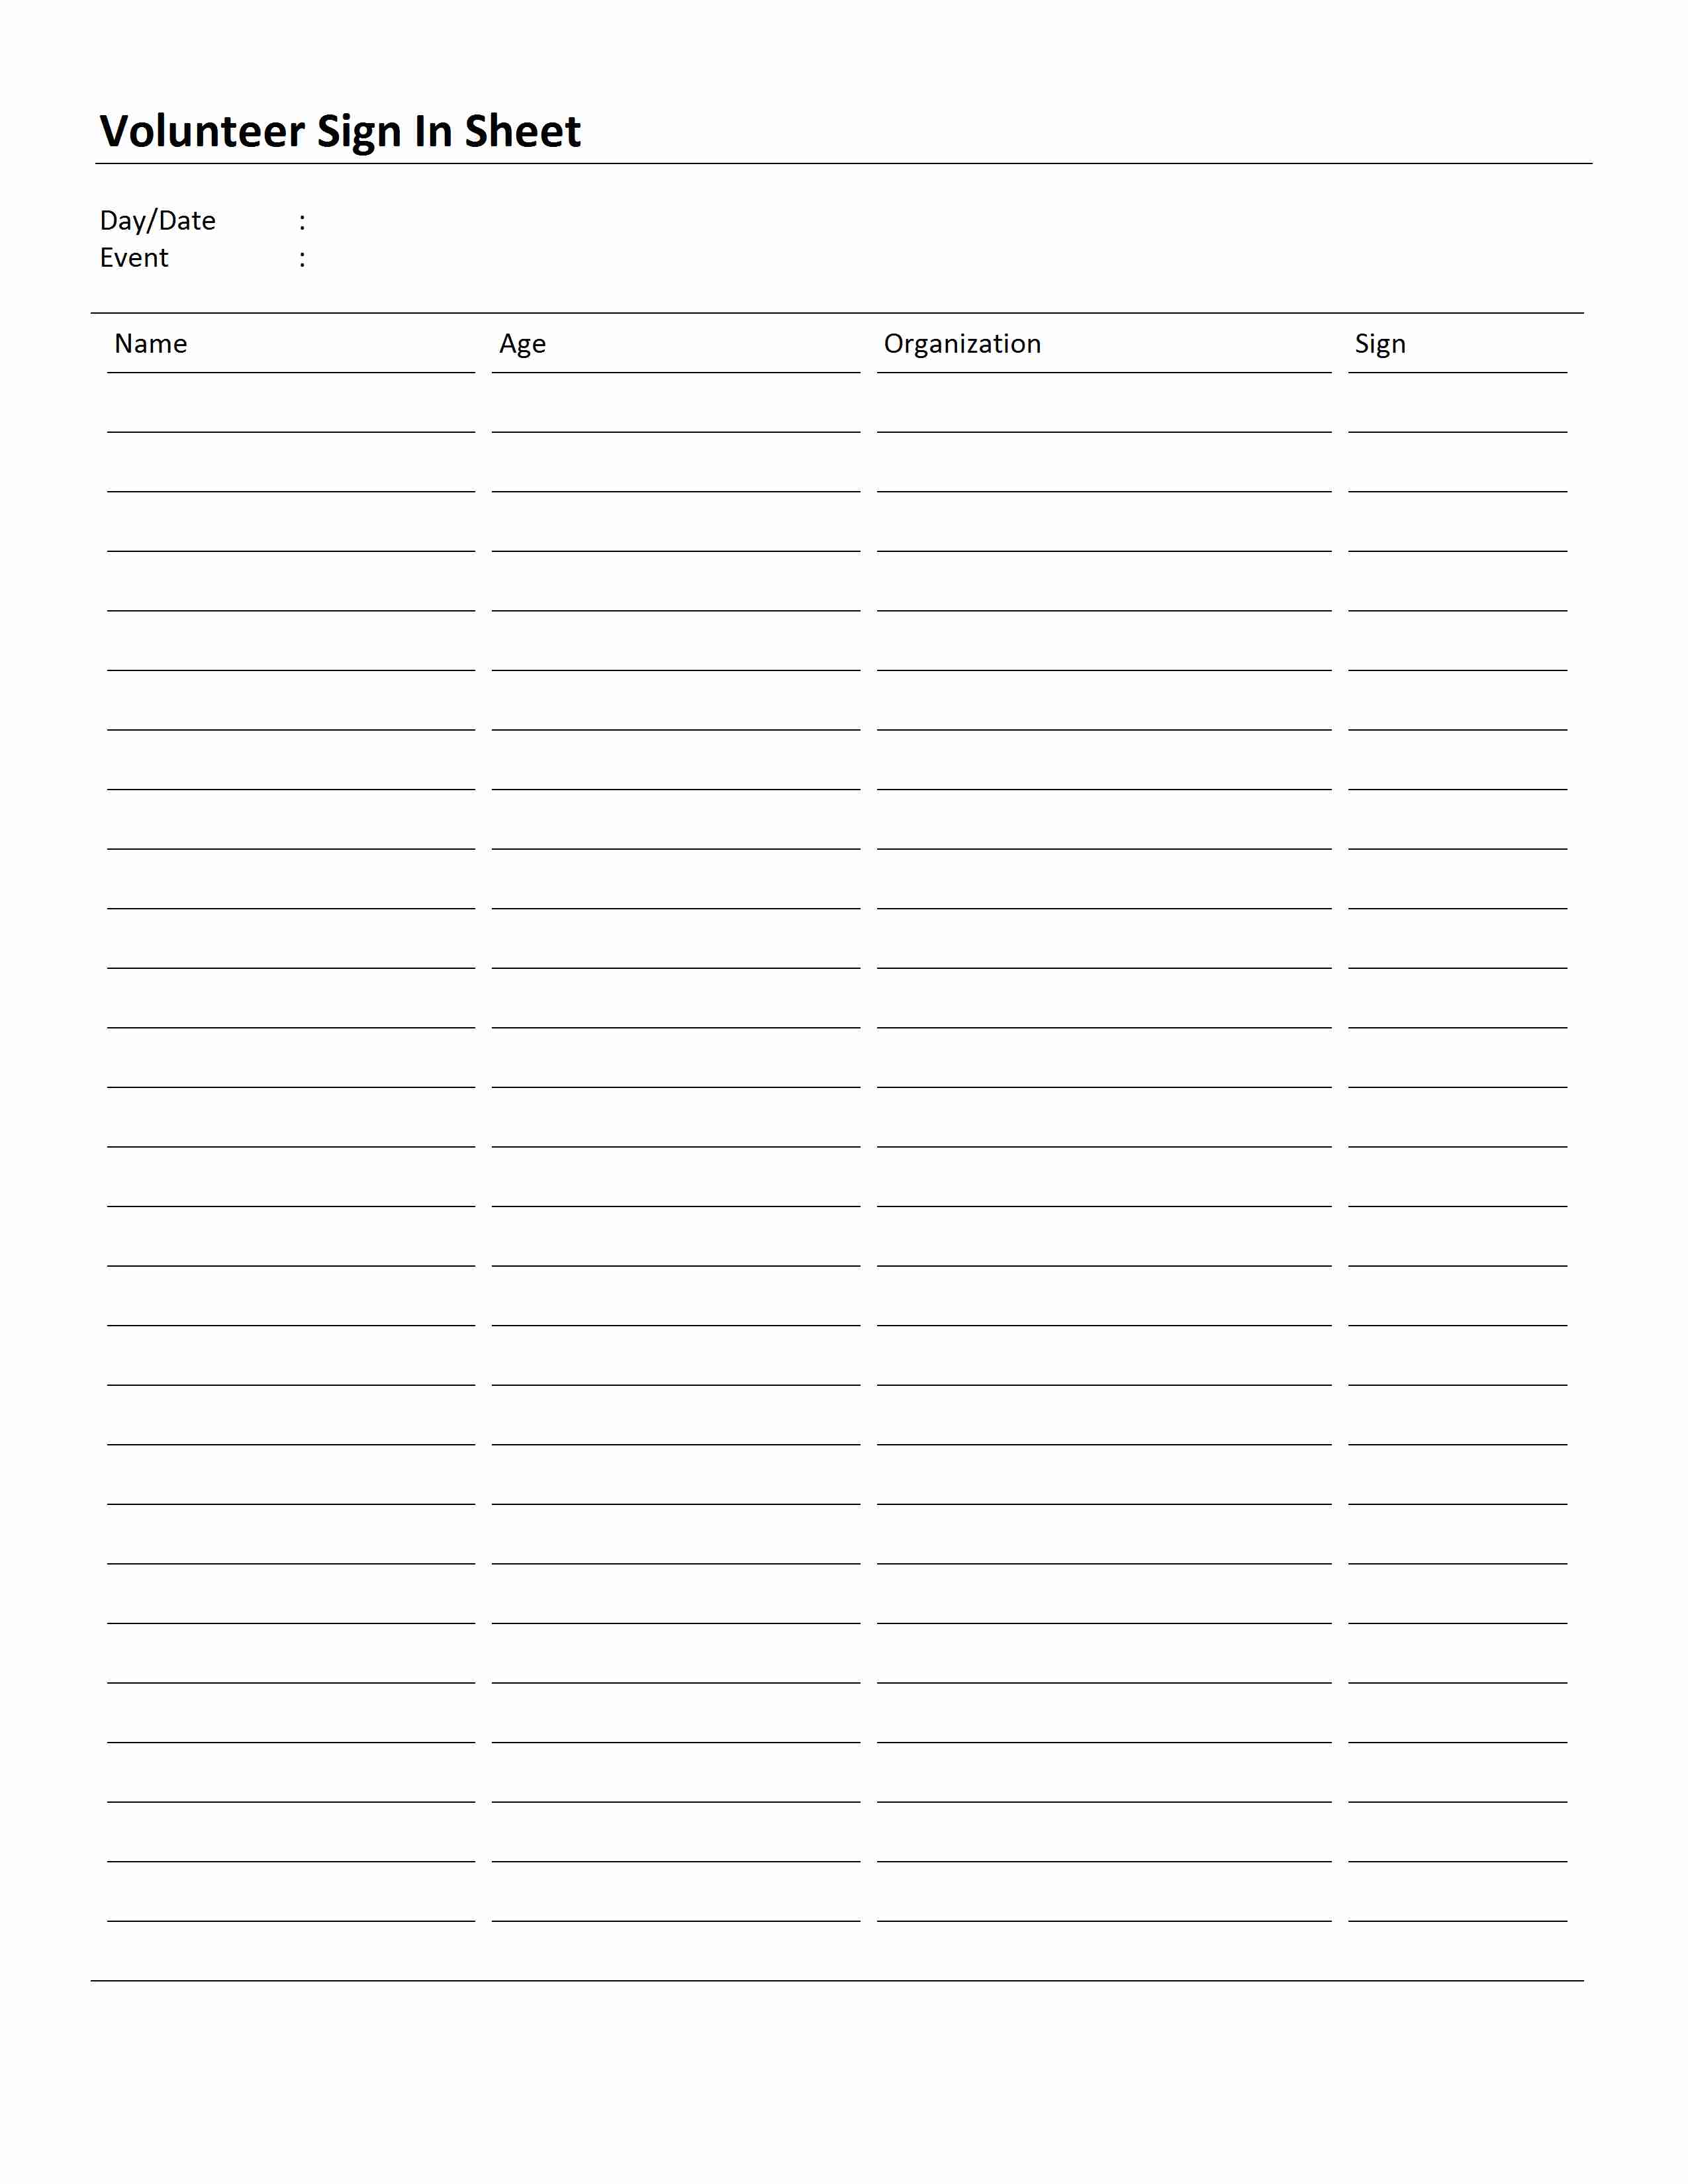 Volunteer Sign In Sheet Template for Word